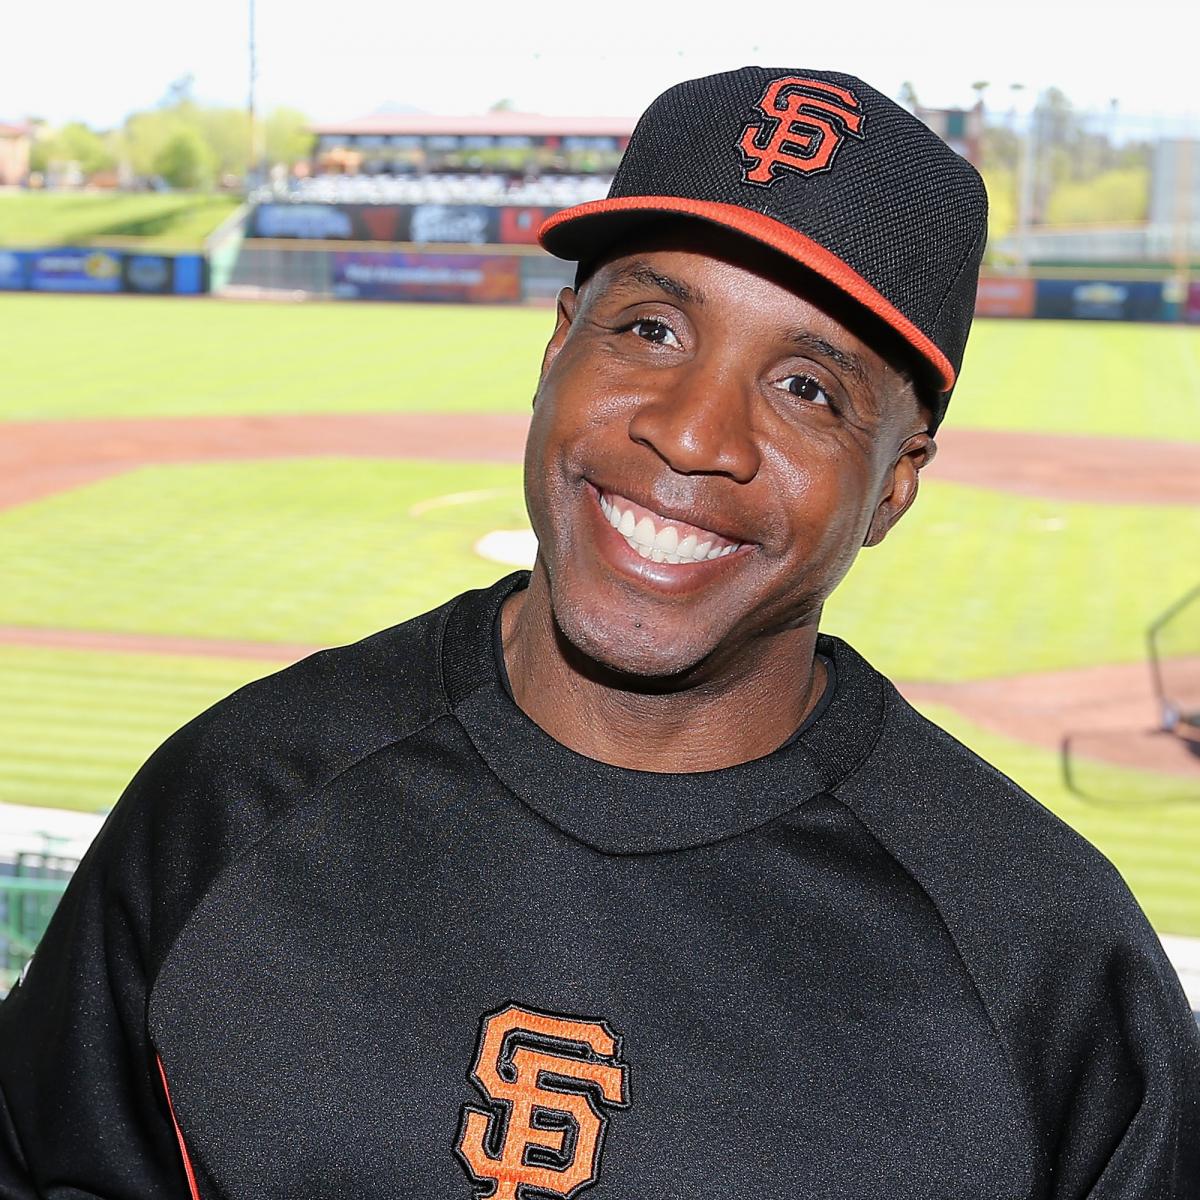 Bochy talks Barry Bonds ahead of weekend number retirement: 'the best  player in his era' – KNBR